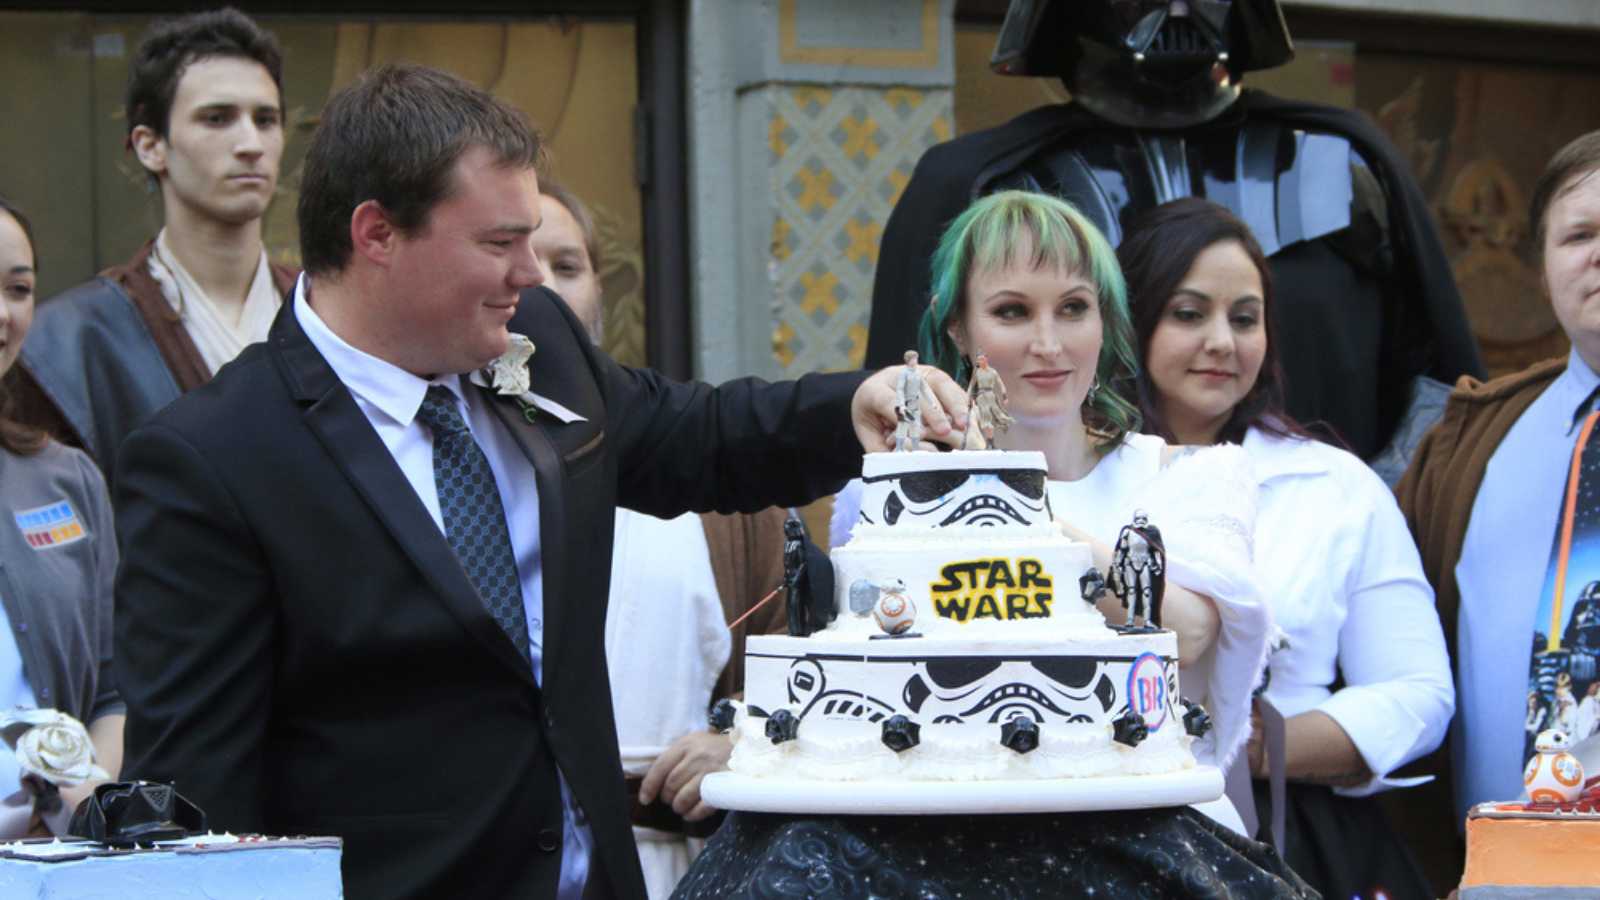 LOS ANGELES - DEC 17: Andrew Porters, Caroline Ritter at the Australian Star Wars fans get married in a Star Wars-themed wedding at the TCL Chinese Theater on December 17, 2015 in Los Angeles, CA